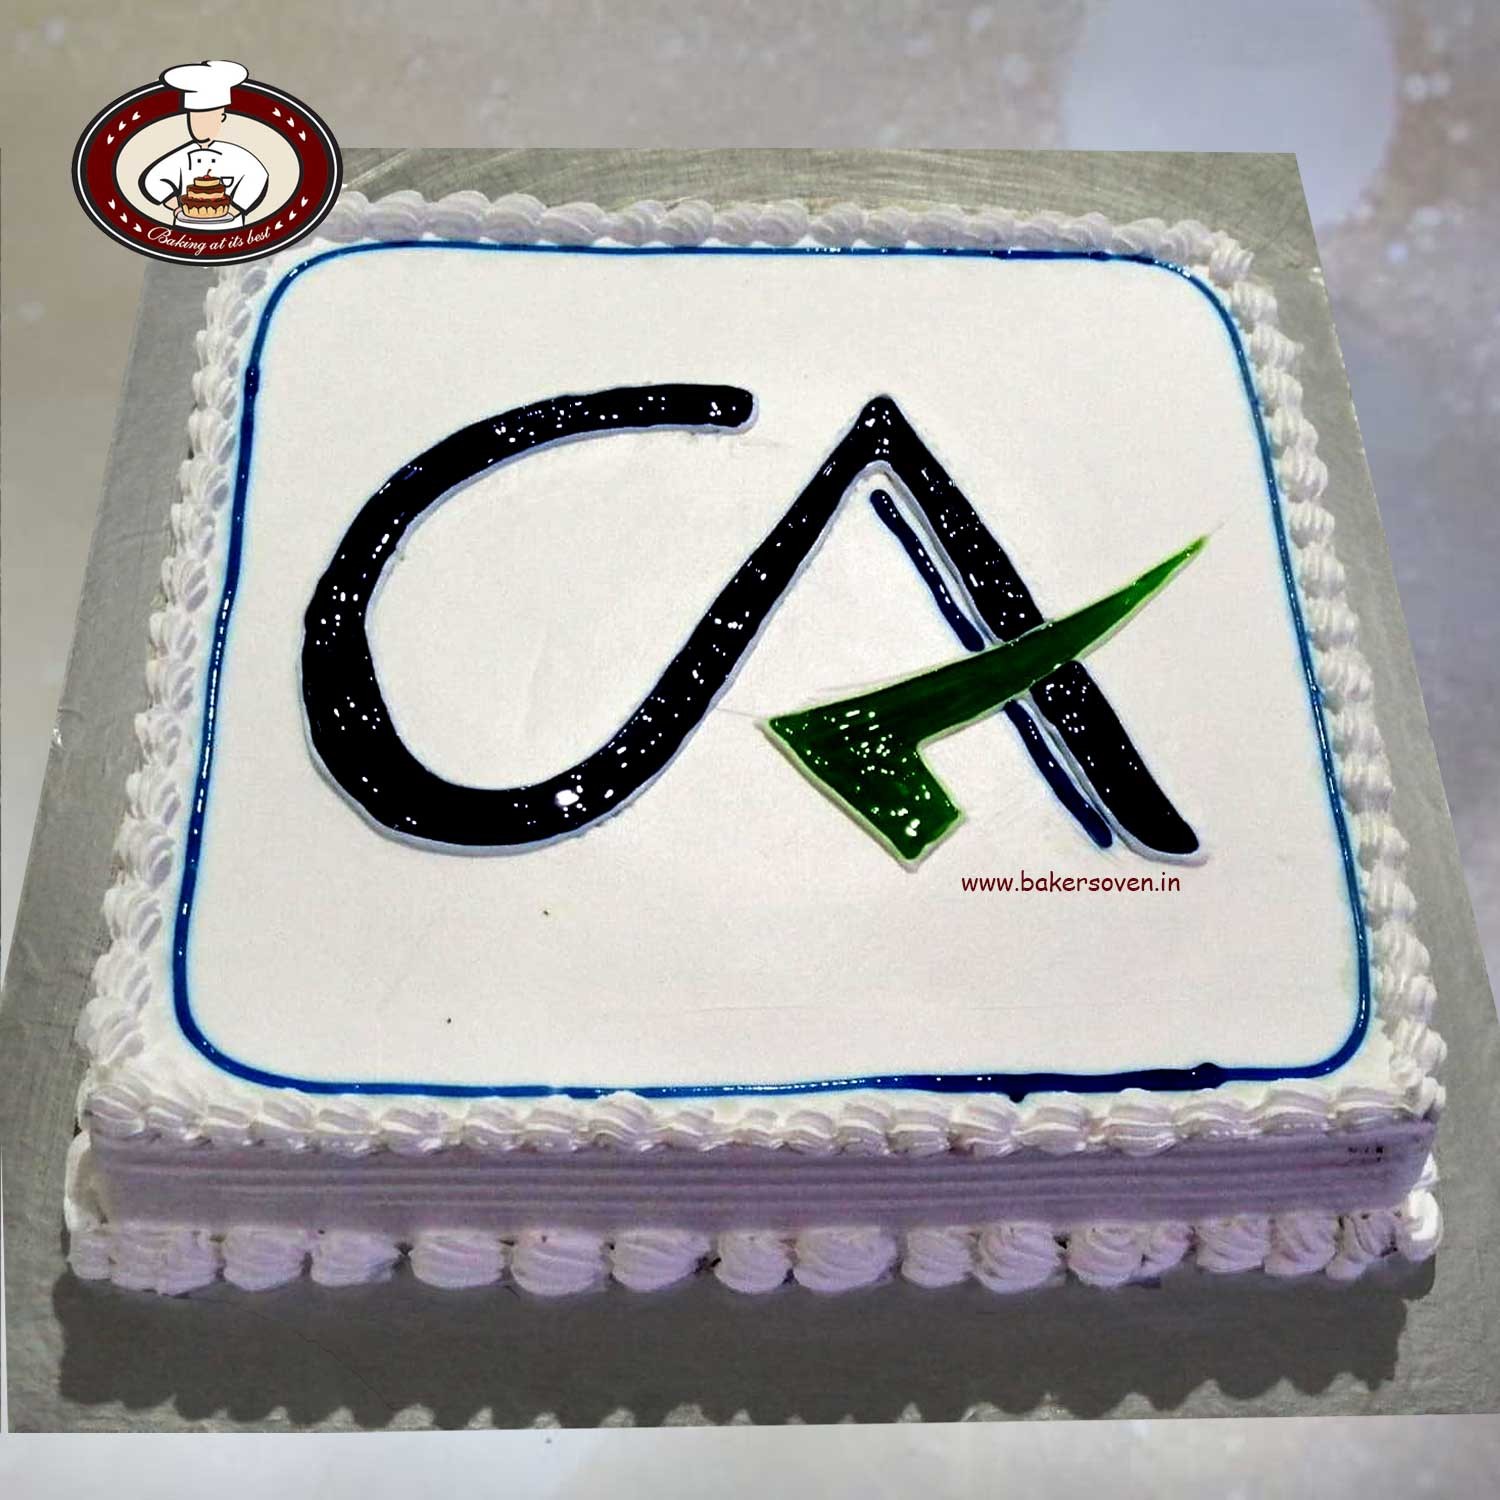 Buy Accountant Theme Cakes Online in Gurgaon - Send Professional Theme Cakes  in Gurgaon